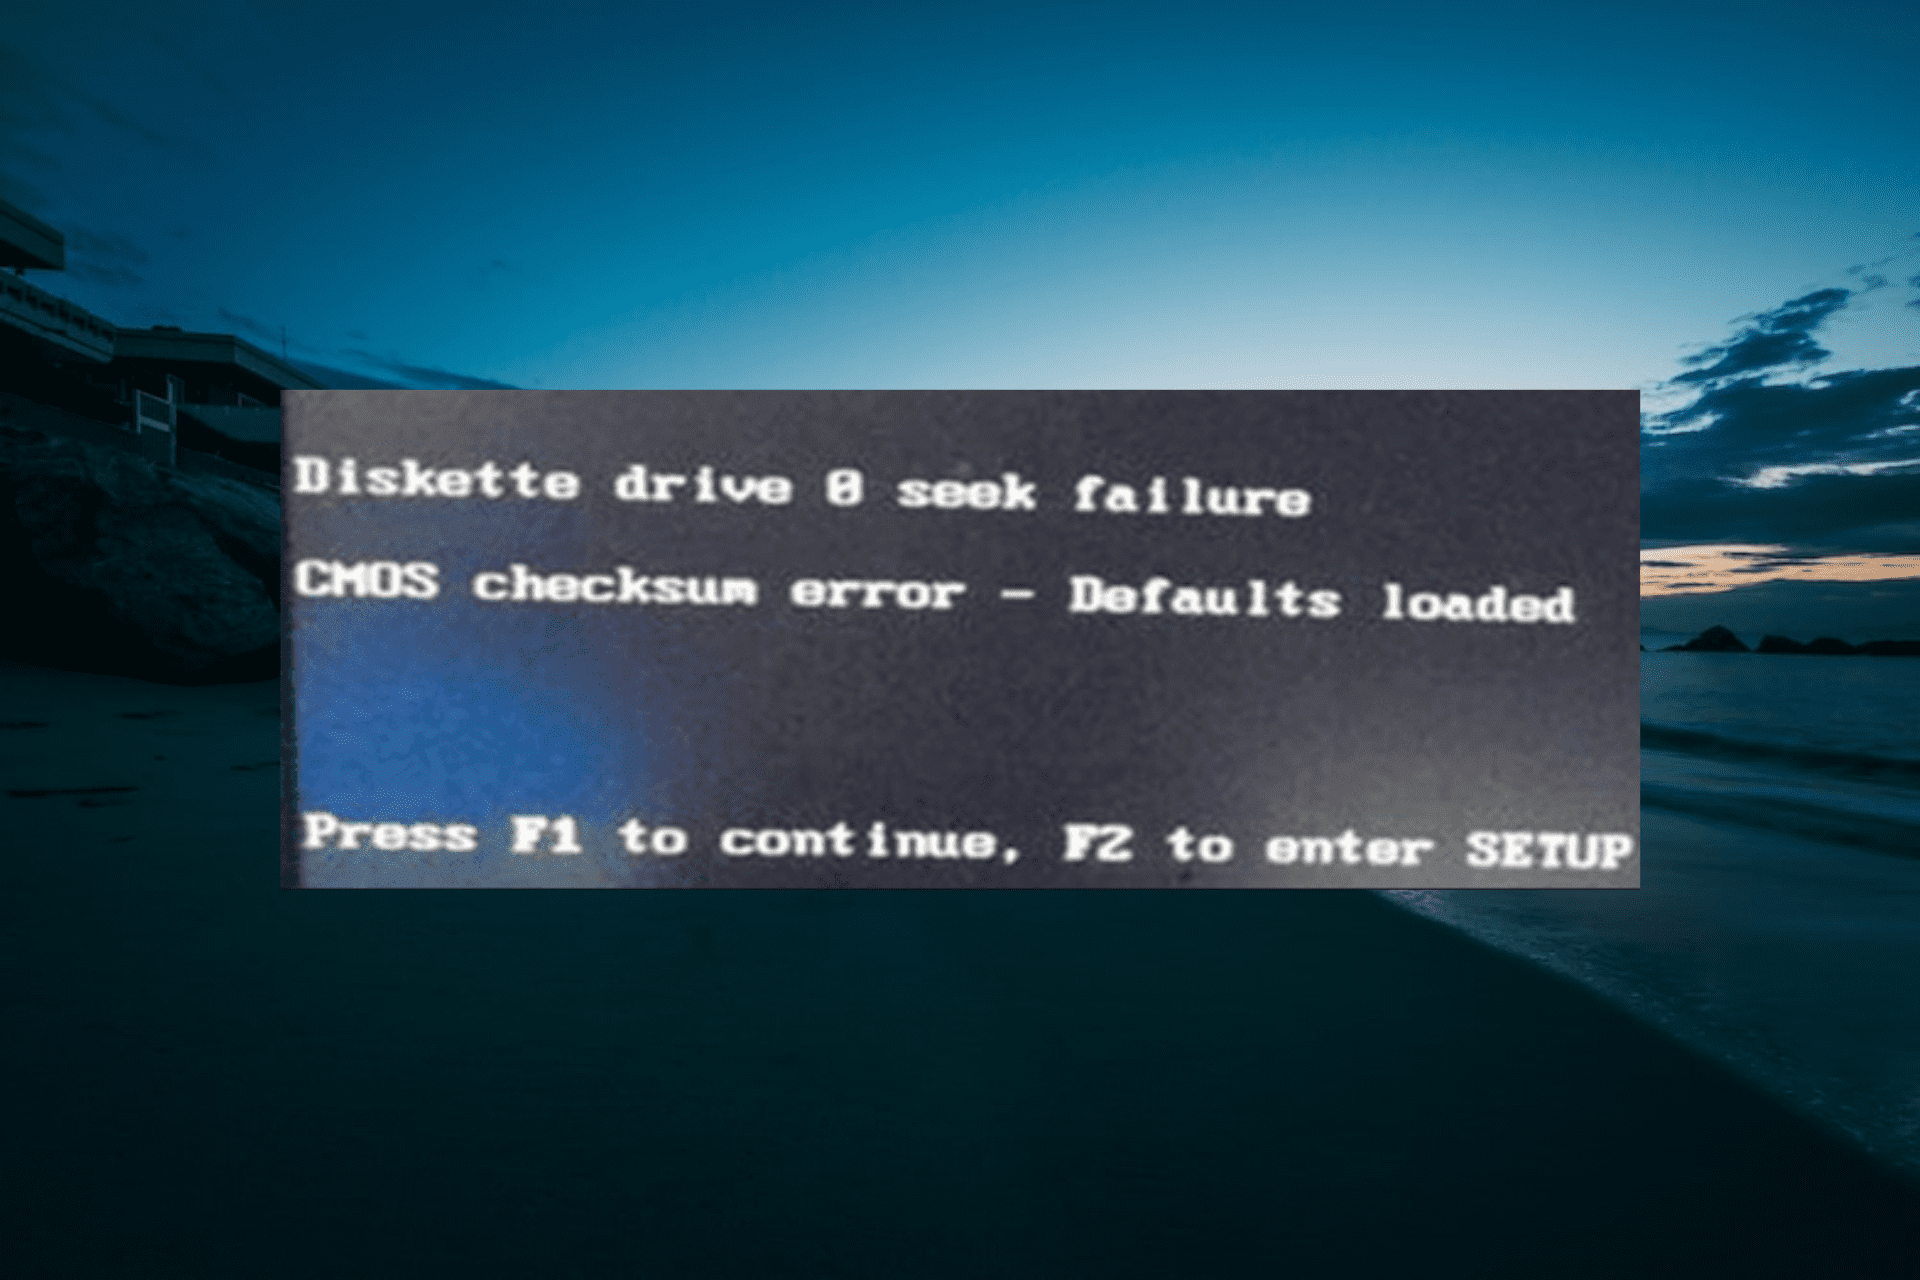 How To Replace CMOS Battery to Fix 'Press F1 to Run Setup' Error